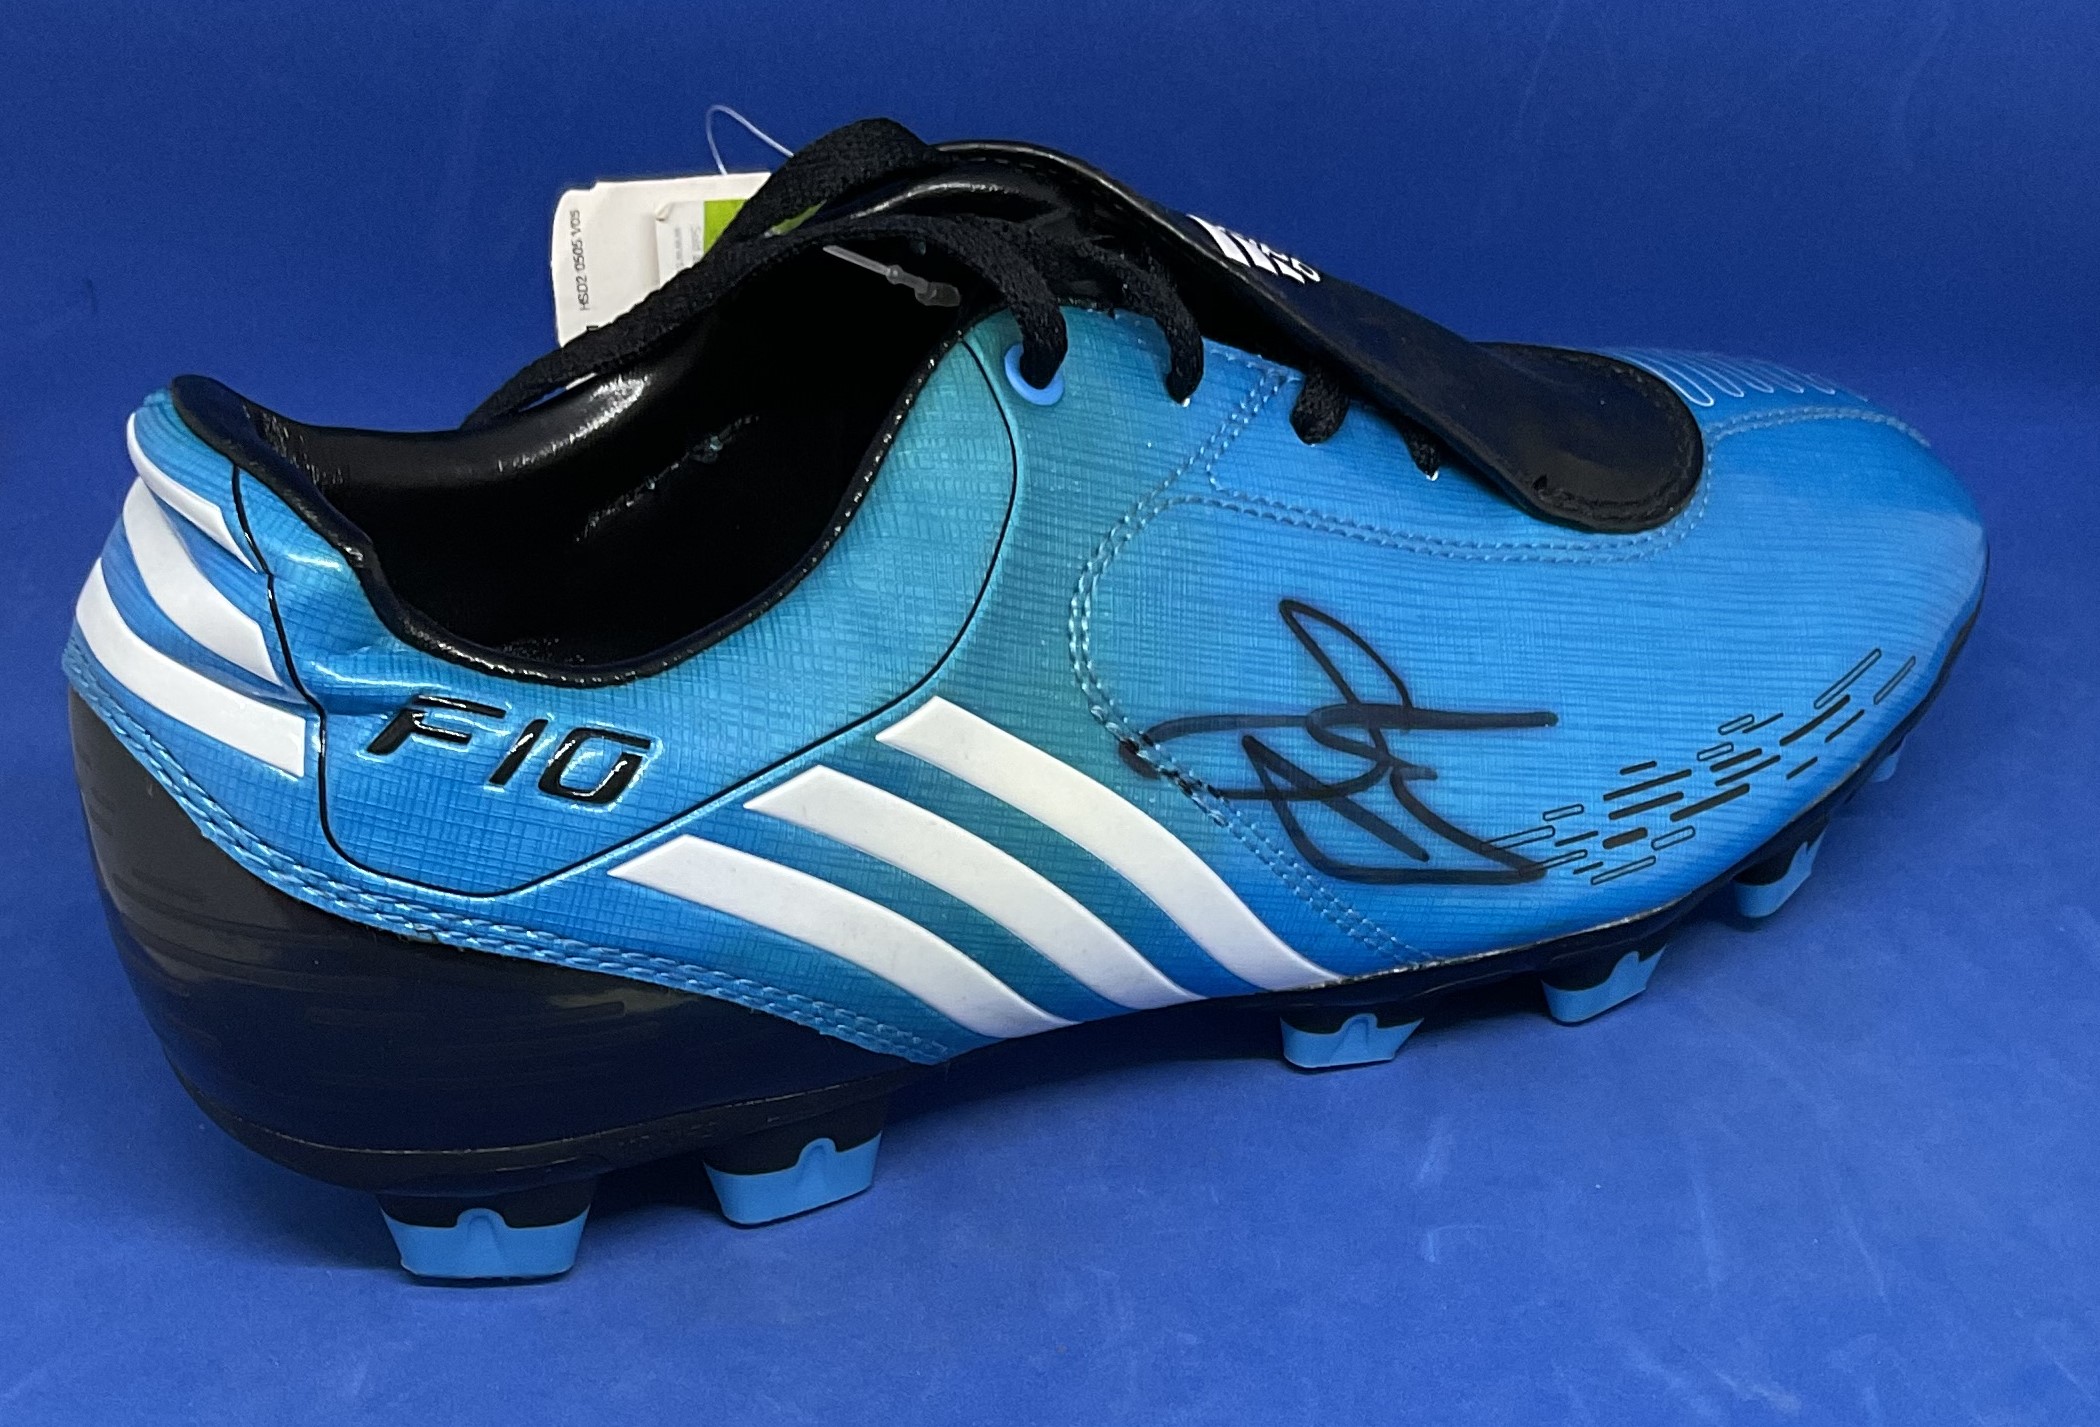 Football Joe Cole signed Adidas blue football boot. Good condition. All autographs come with a